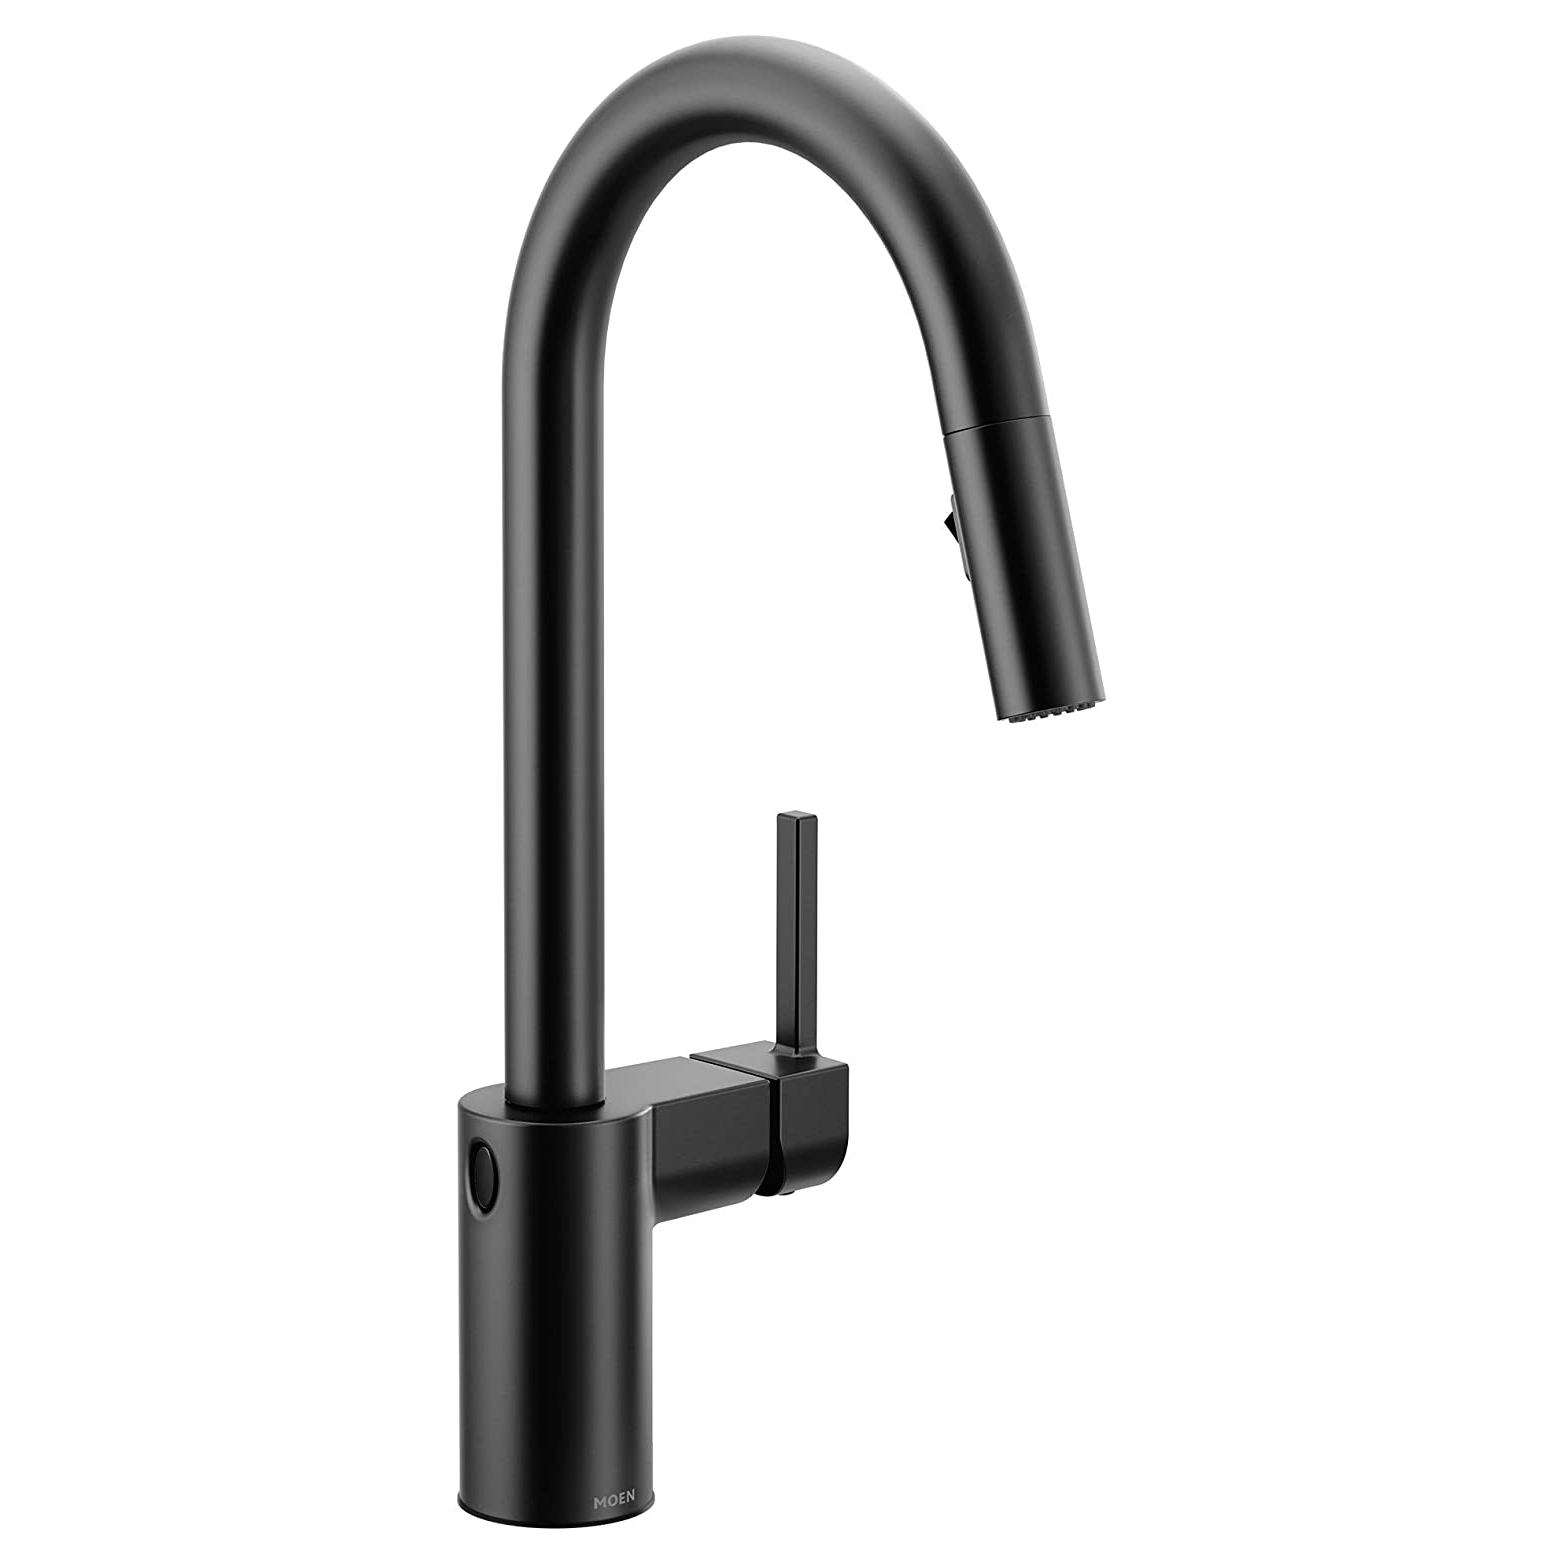 Align MotionSense Wave Pulldown Kitchen Faucet in Black